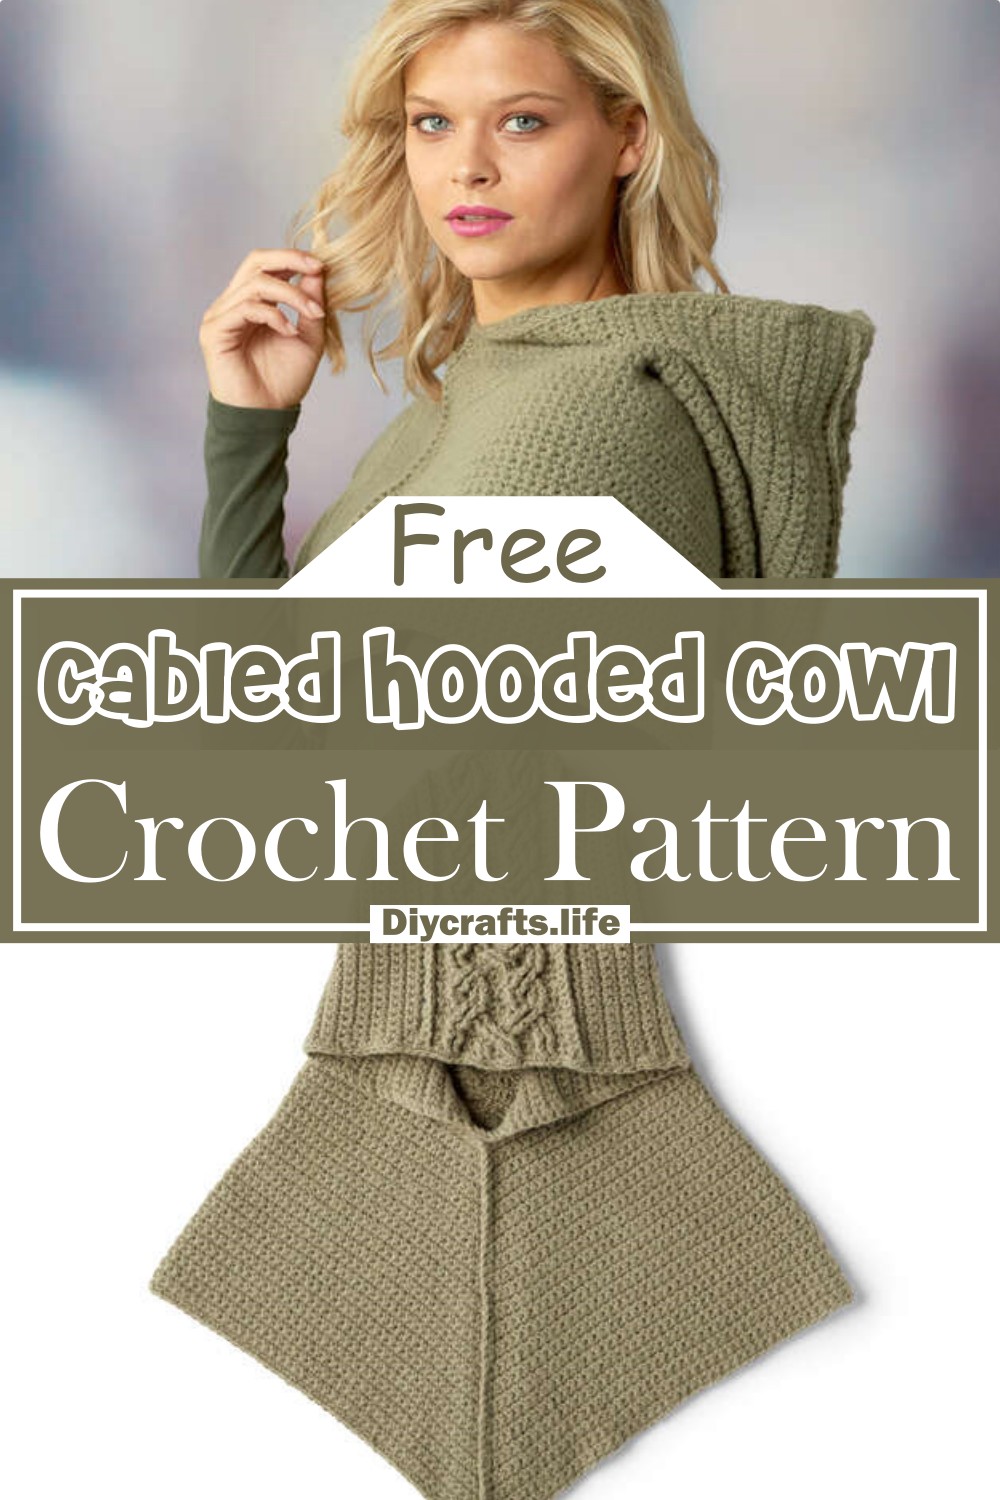 Crochet Cabled Hooded Cowl Pattern